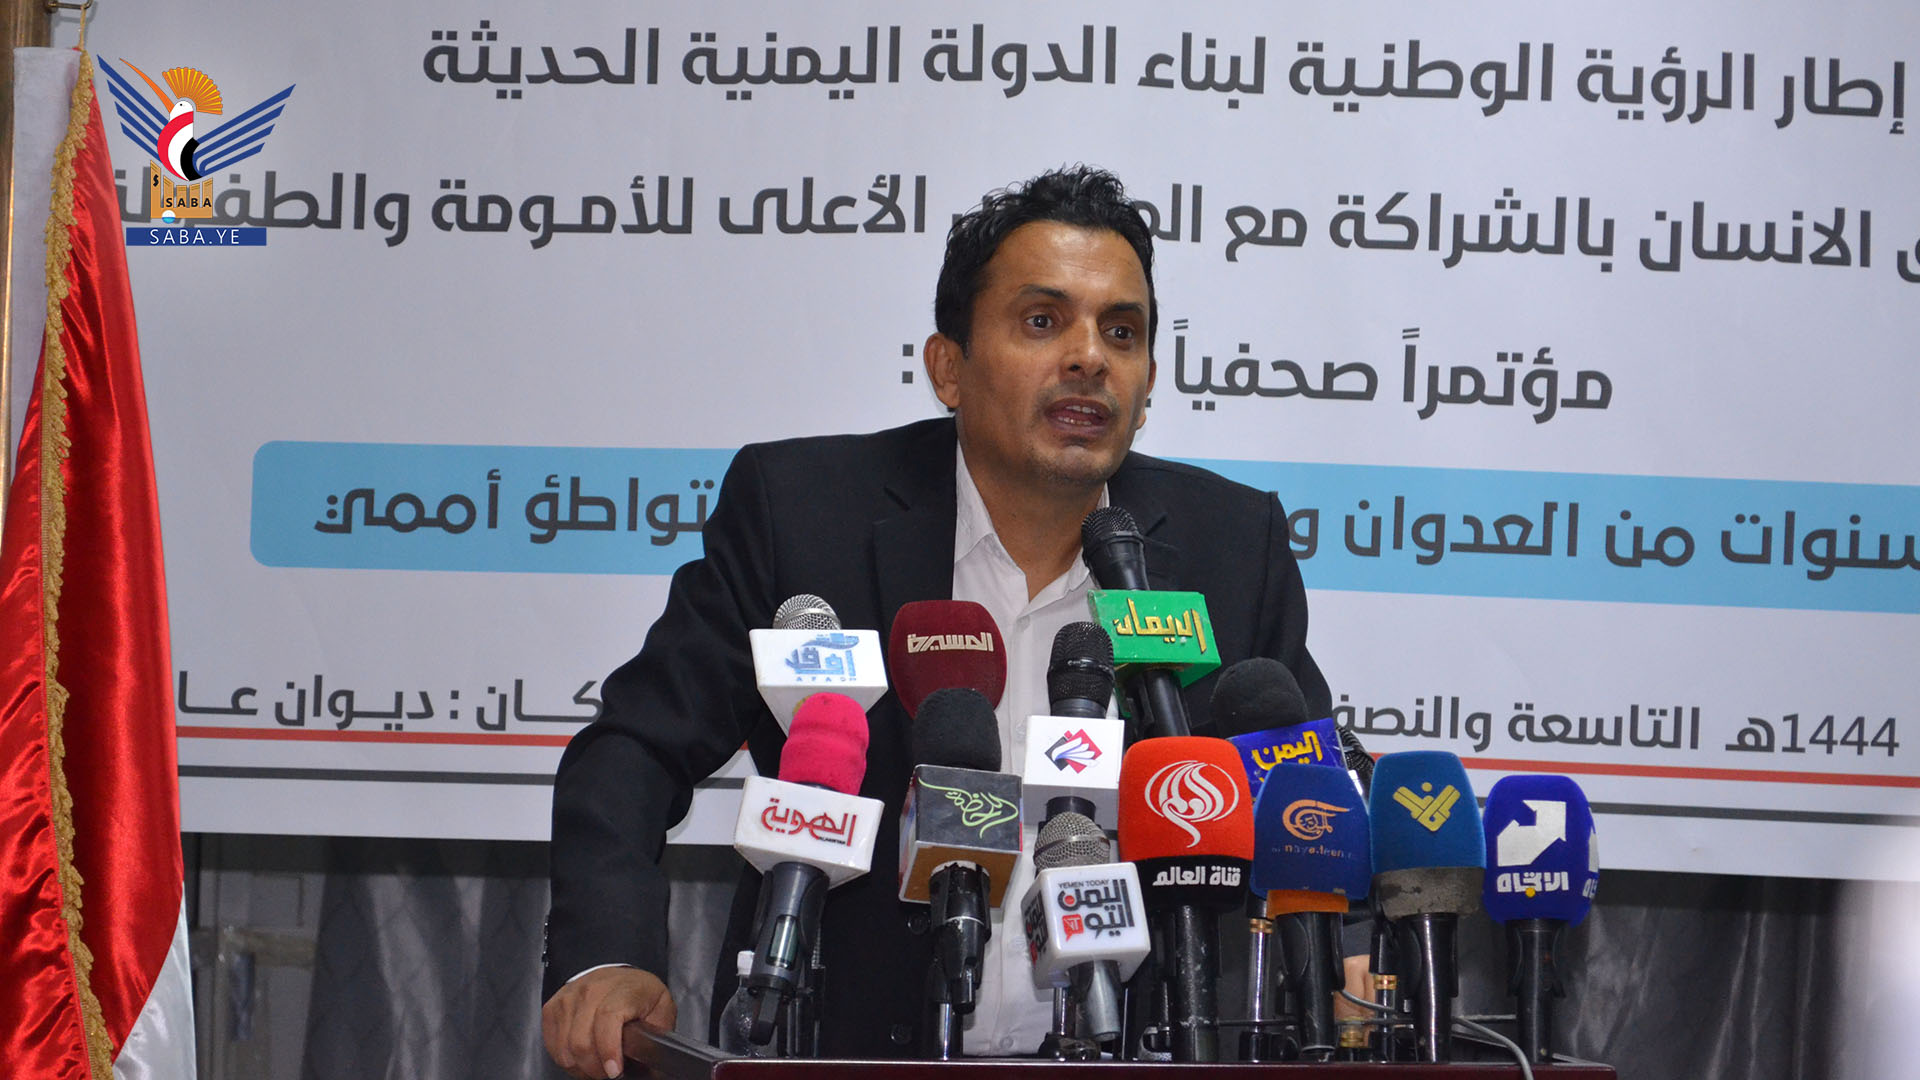 HR holds press conference on occasion of eight years of aggression, siege